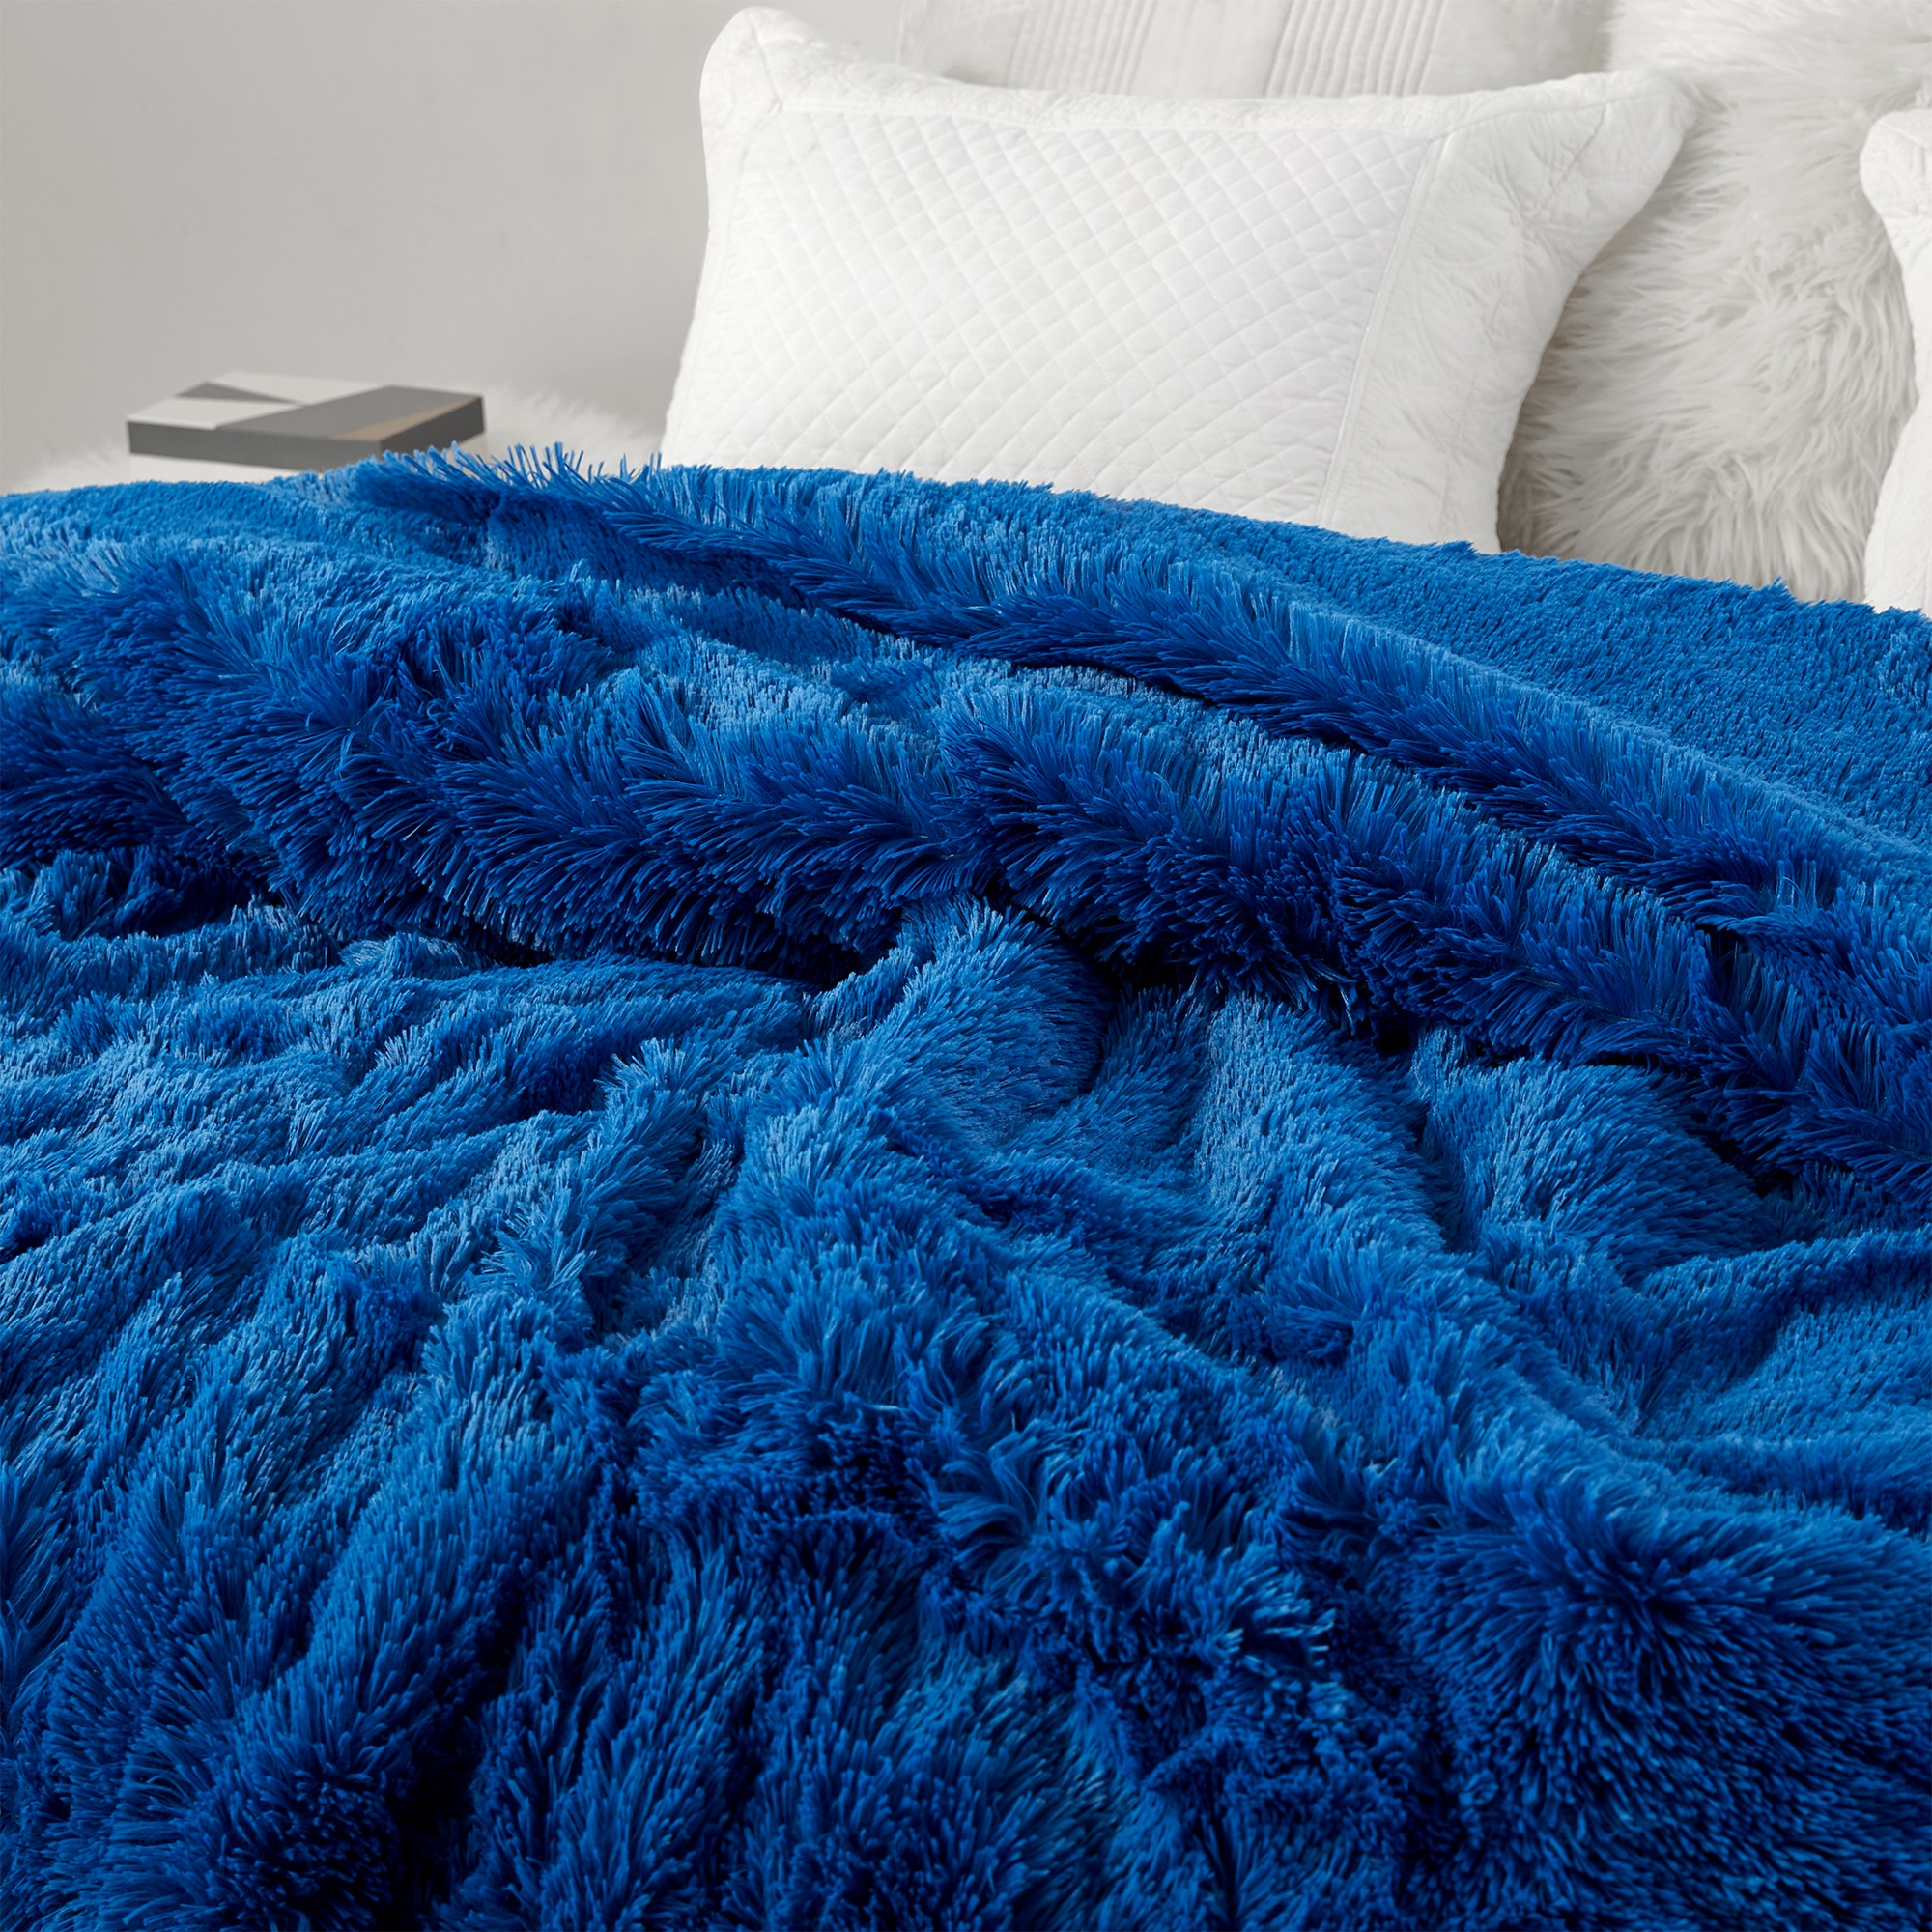 Coma Inducer?? Duvet Cover - Are You Kidding? - Royal Blue/White